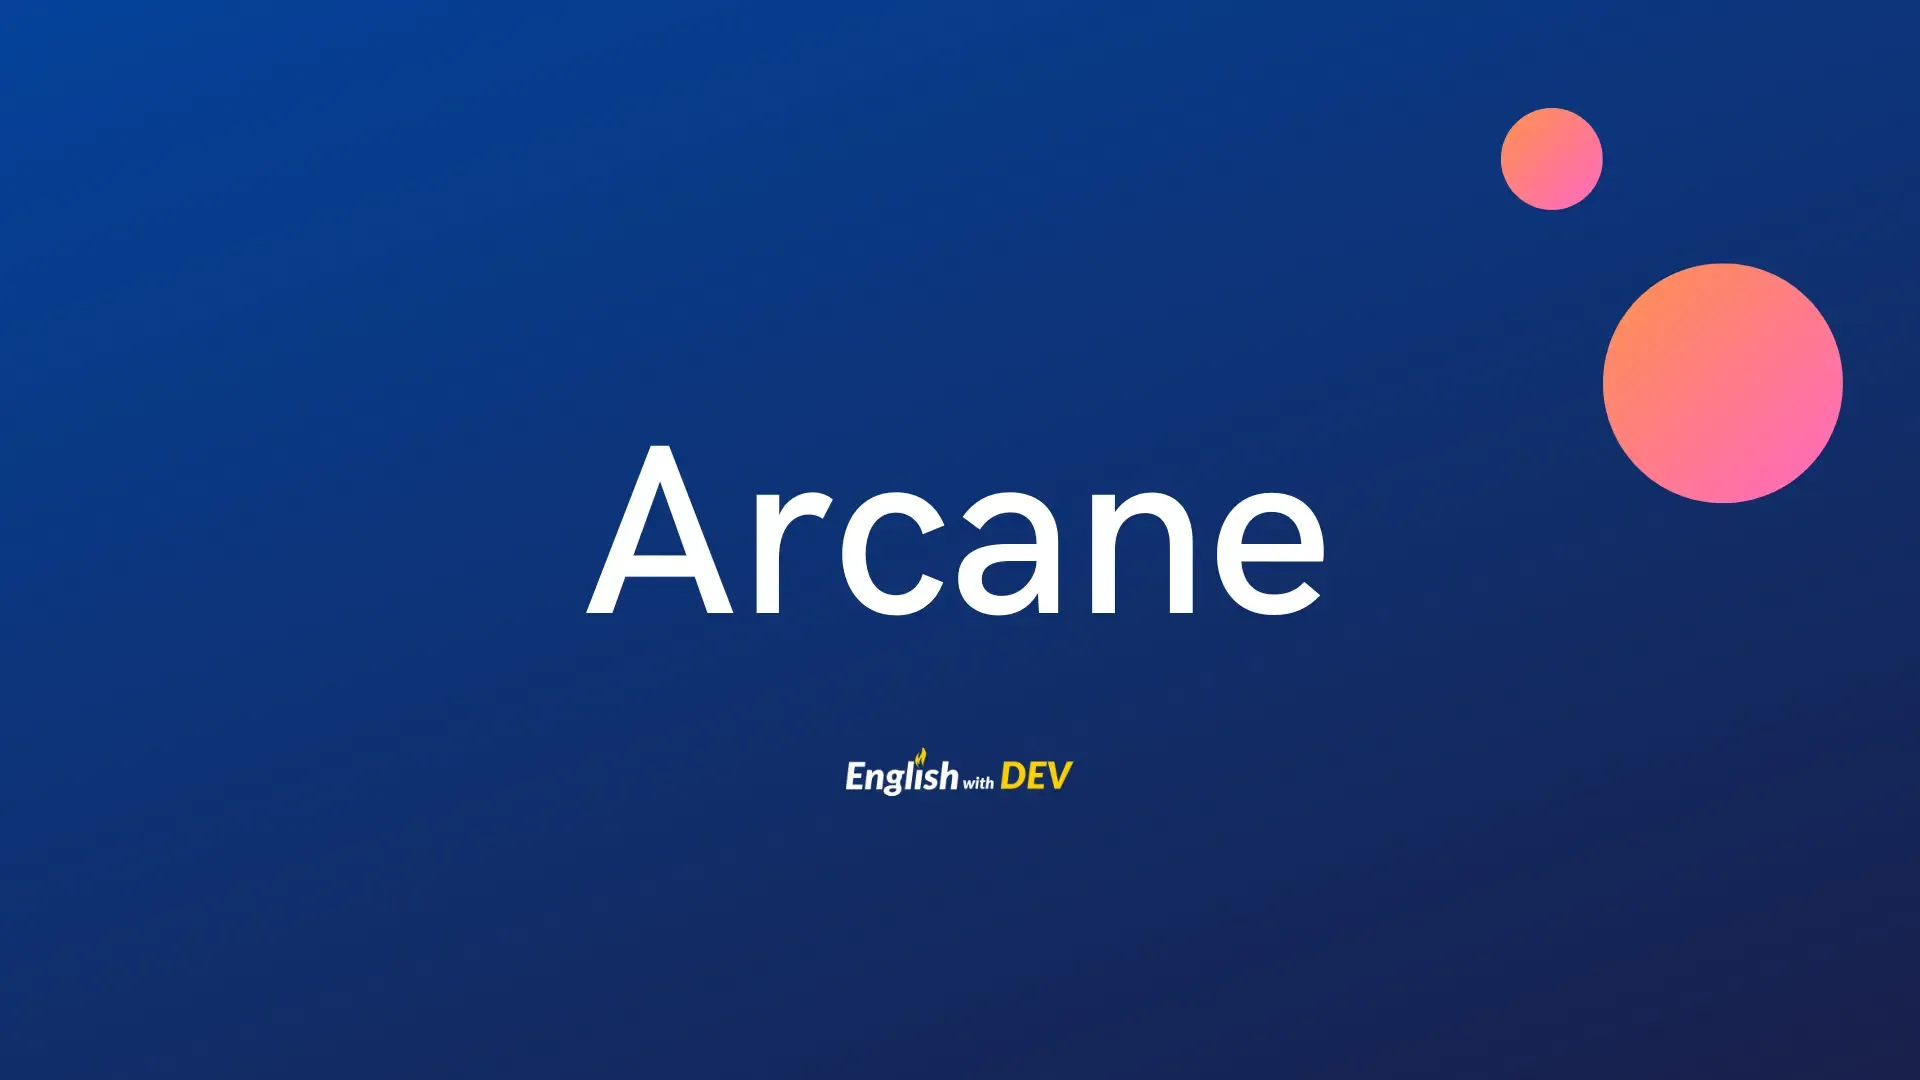 arcane meaning in tamil